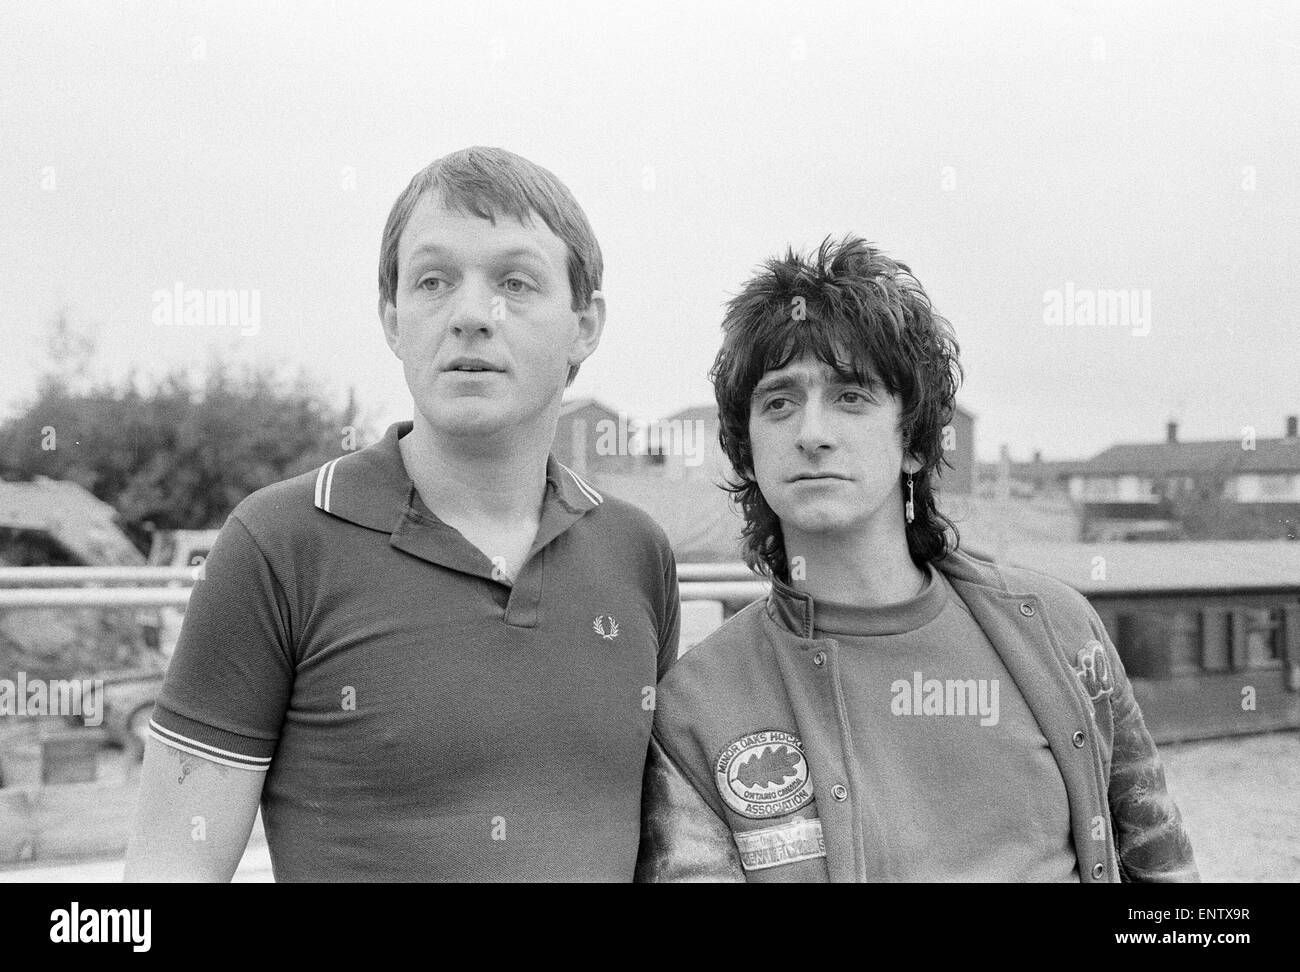 Gary Holton Actor Auf Wiedersehen Pet, television programme, being filmed at Central TV's Elstree Studios, October 1982. The comedy series is about a team of British bricklayers working in Germany. Pictured: Kevin Whately and Gary Holton. Stock Photo